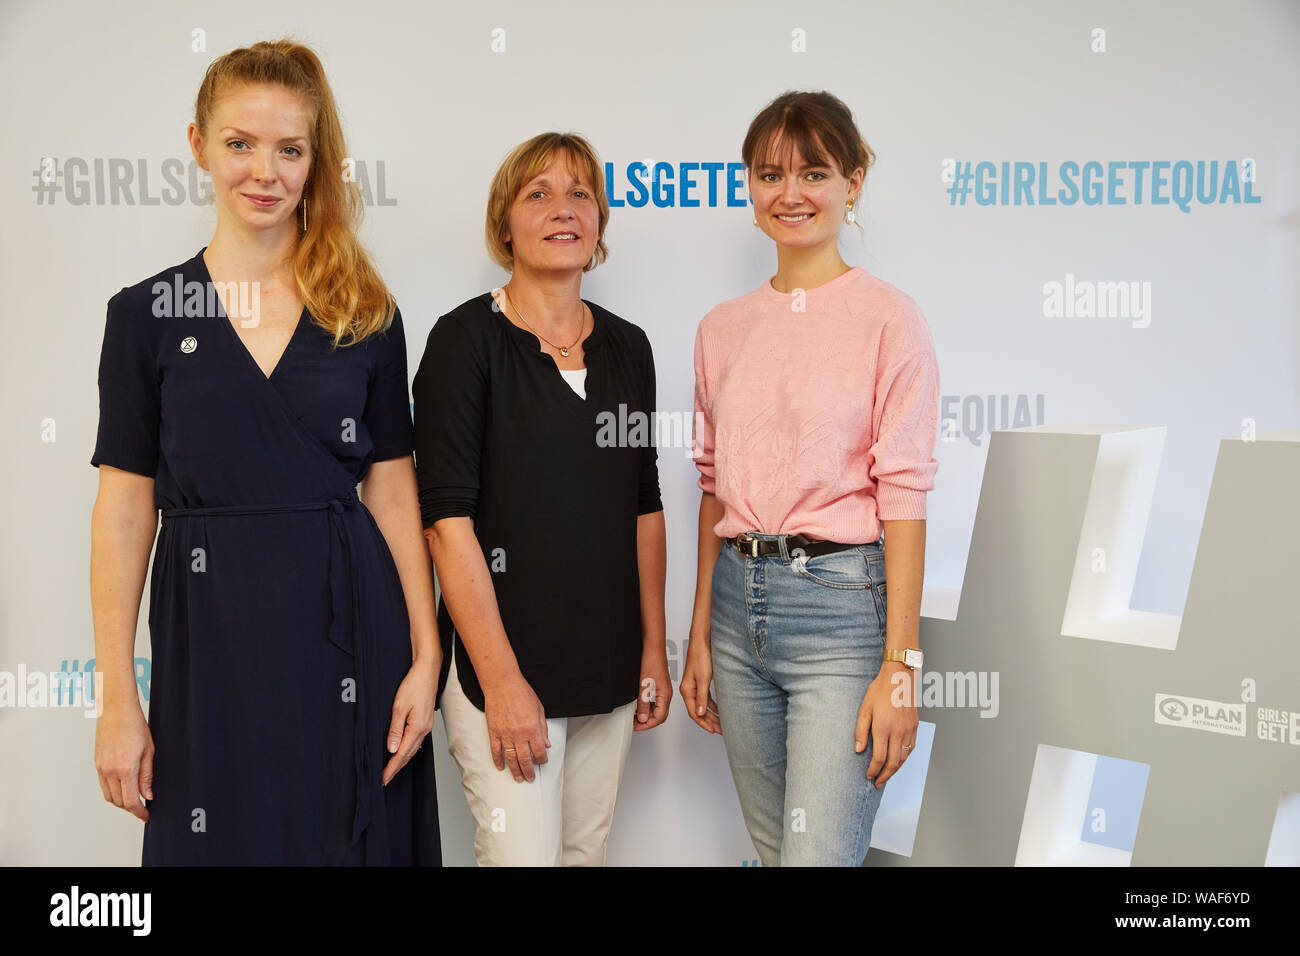 Hamburg, Germany. 20th Aug, 2019. Pheline Roggan (l-r), actress and Plan ambassador, Maike Röttger, Plan managing director, and Hannah Müller-Hillebrand, influencer and Plan ambassador, have come together for a photo after a Plan International press conference on role models in the social media. Credit: Georg Wendt/dpa/Alamy Live News Stock Photo